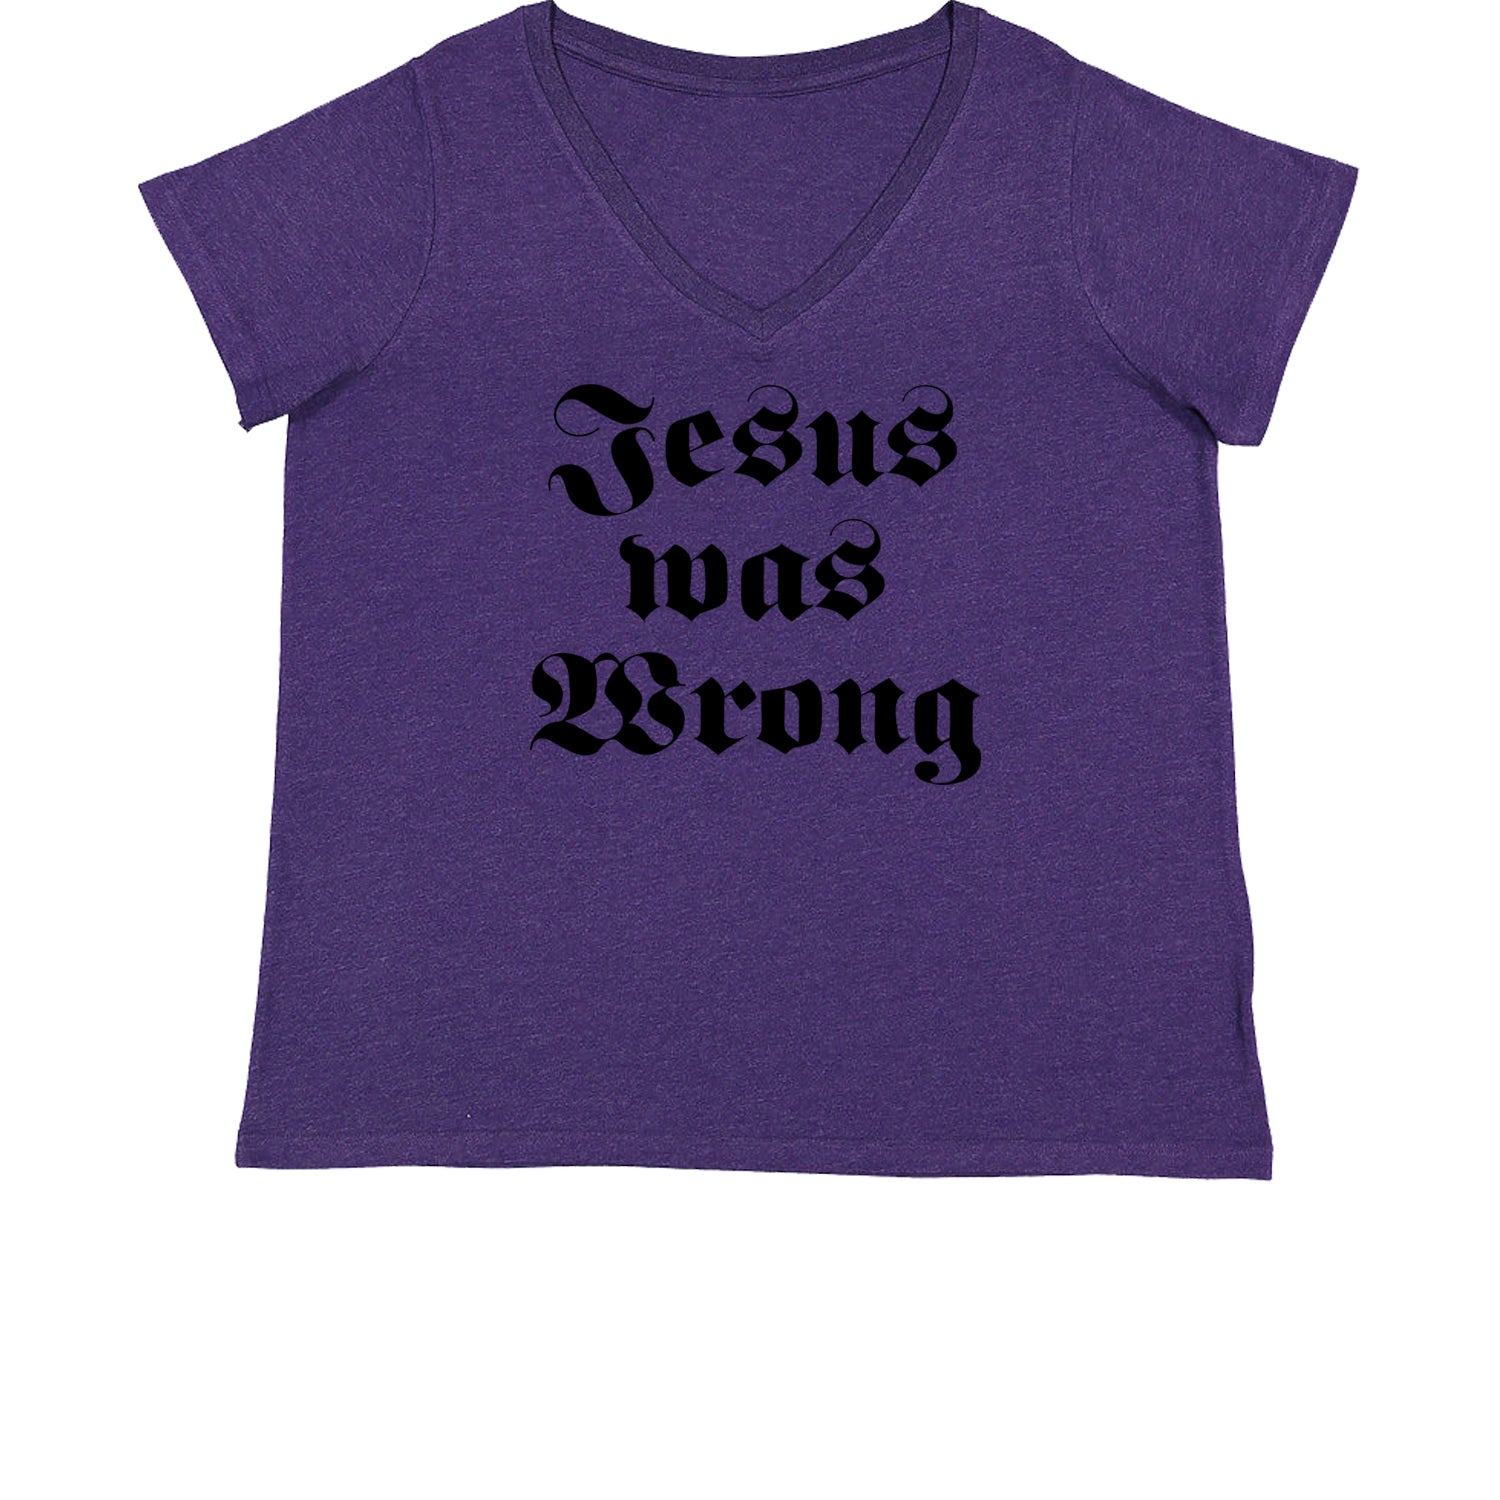 Jesus Was Wrong Little Miss Sunshine Womens Plus Size V-Neck T-shirt breslin, dano, movie, paul, shine, shirt, sun by Expression Tees